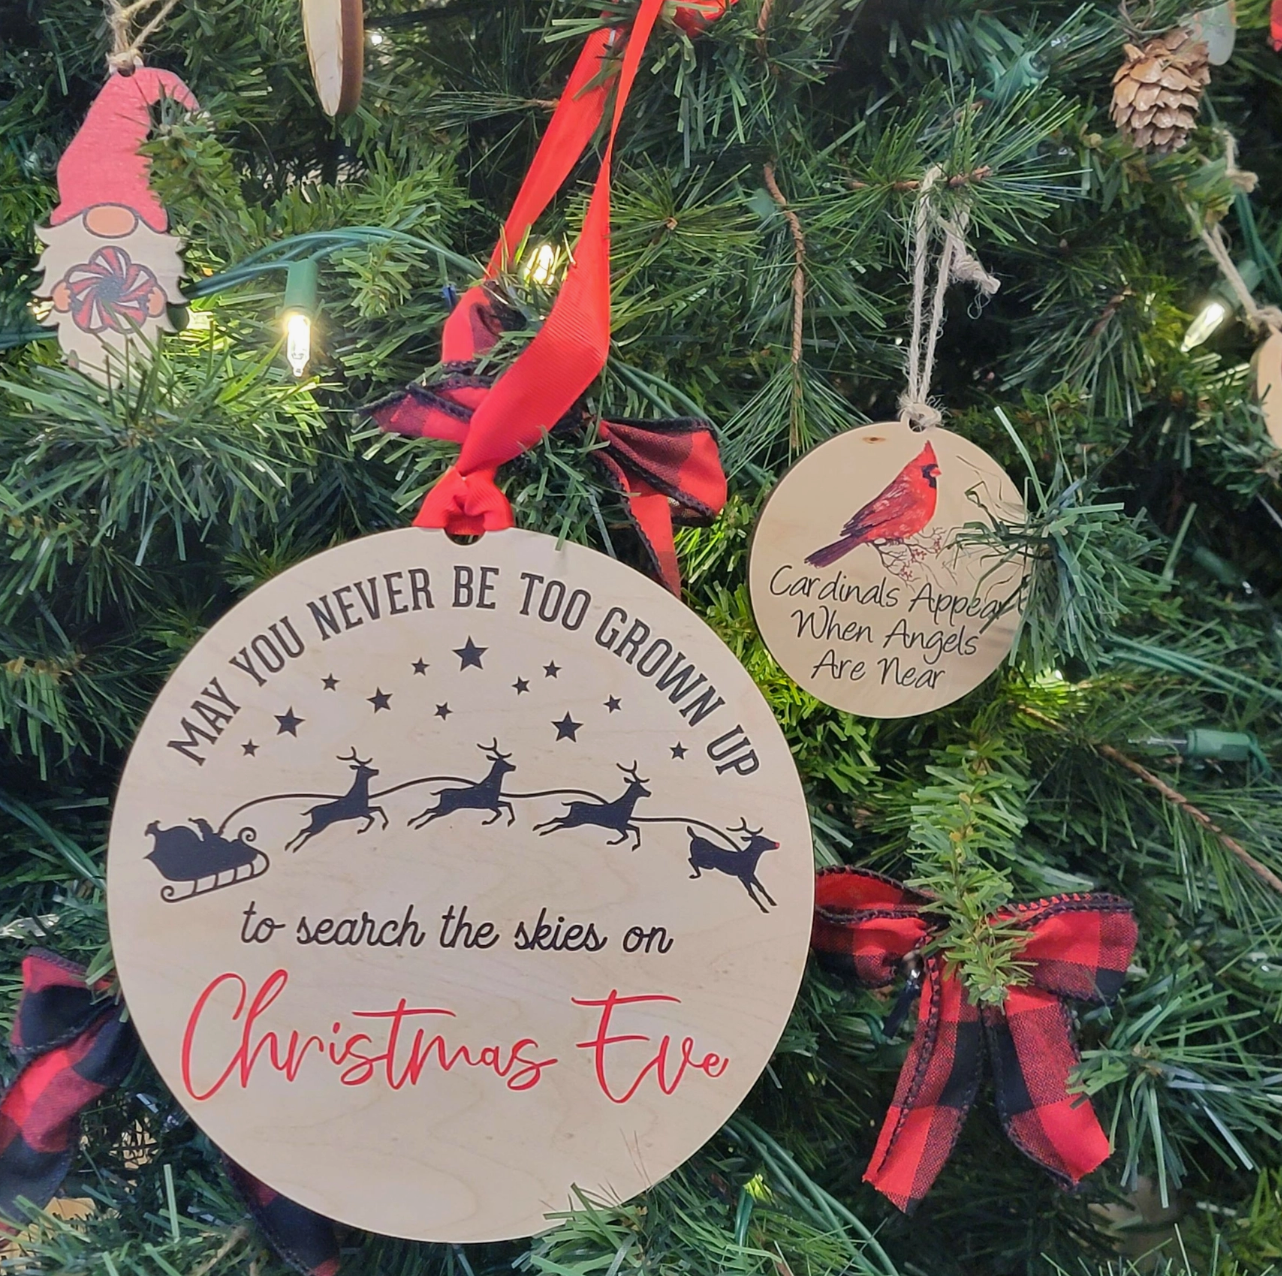 Search the Skies On Xmas Wreath Ornaments/ Mantle Ornament